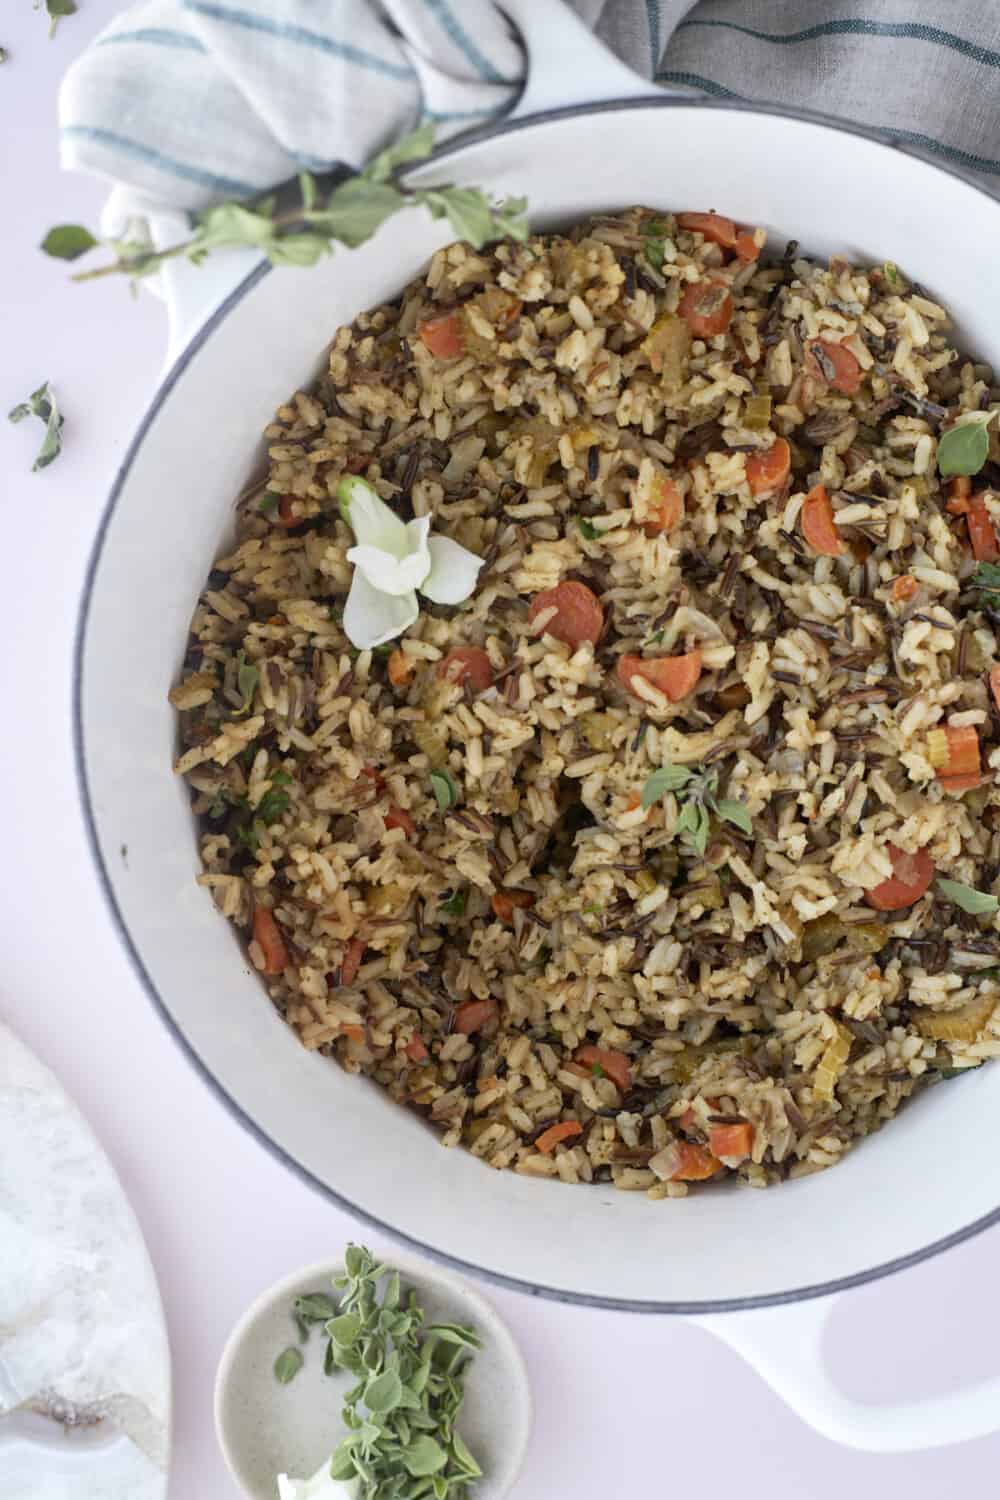 a bowl of seasoned rice pilaf with veggies